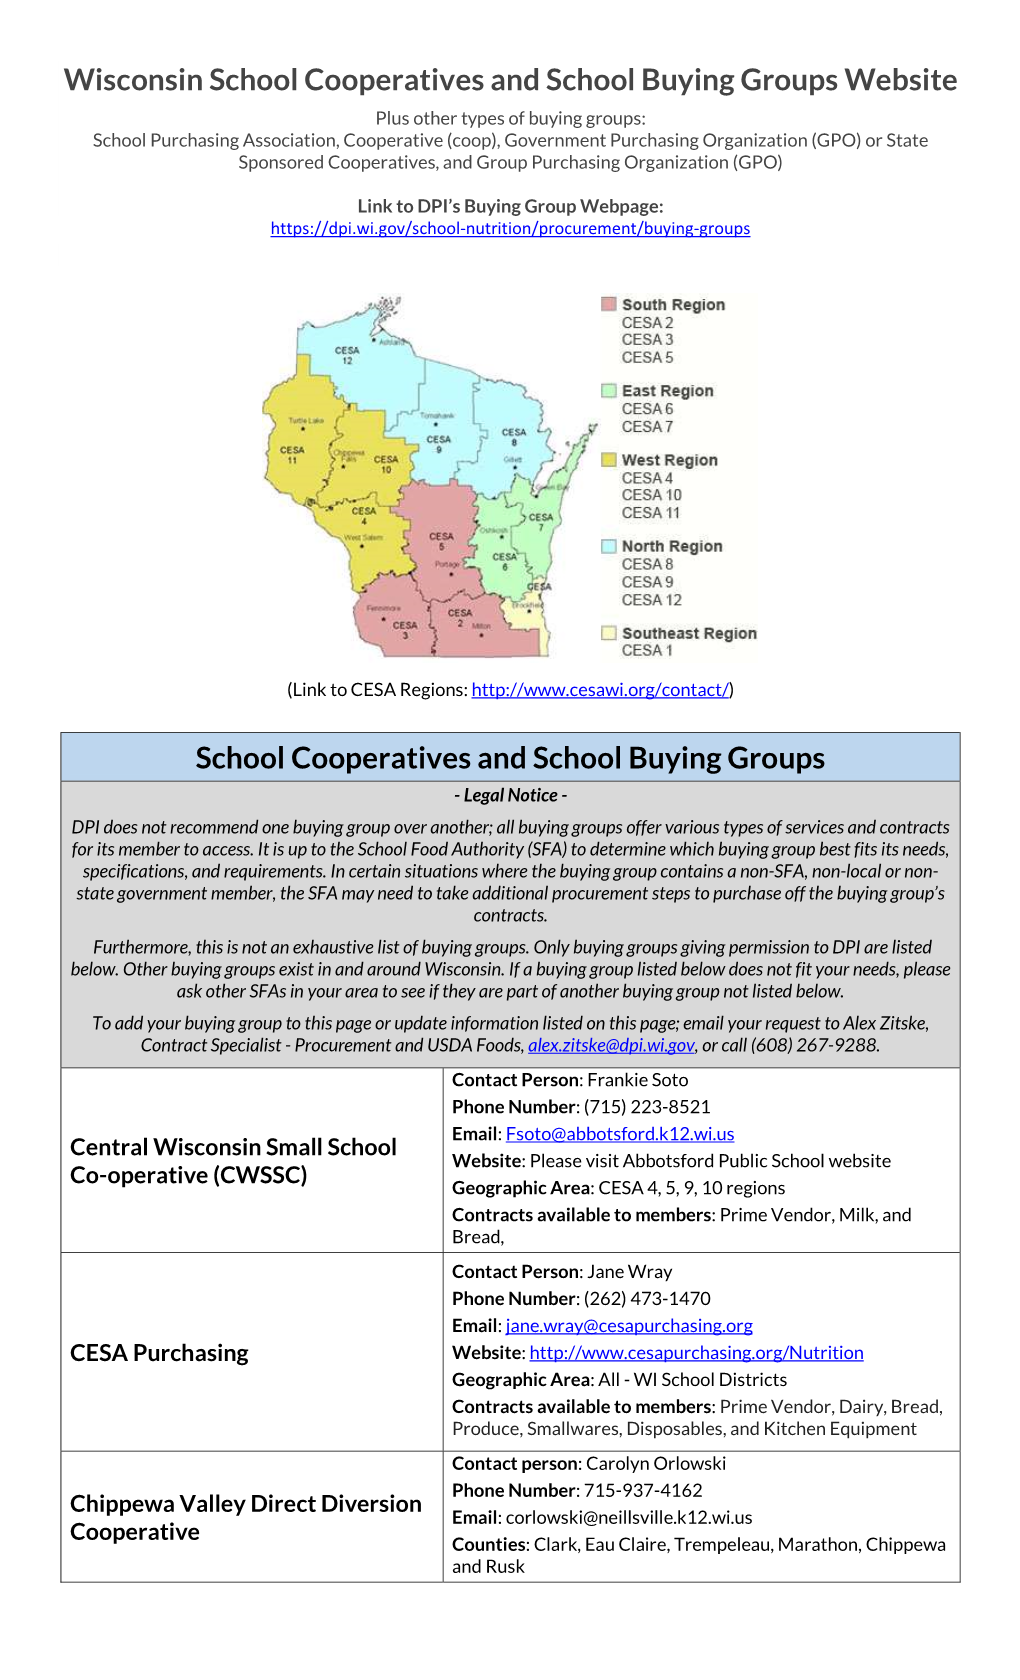 Wisconsin School Cooperatives and Buying Groups